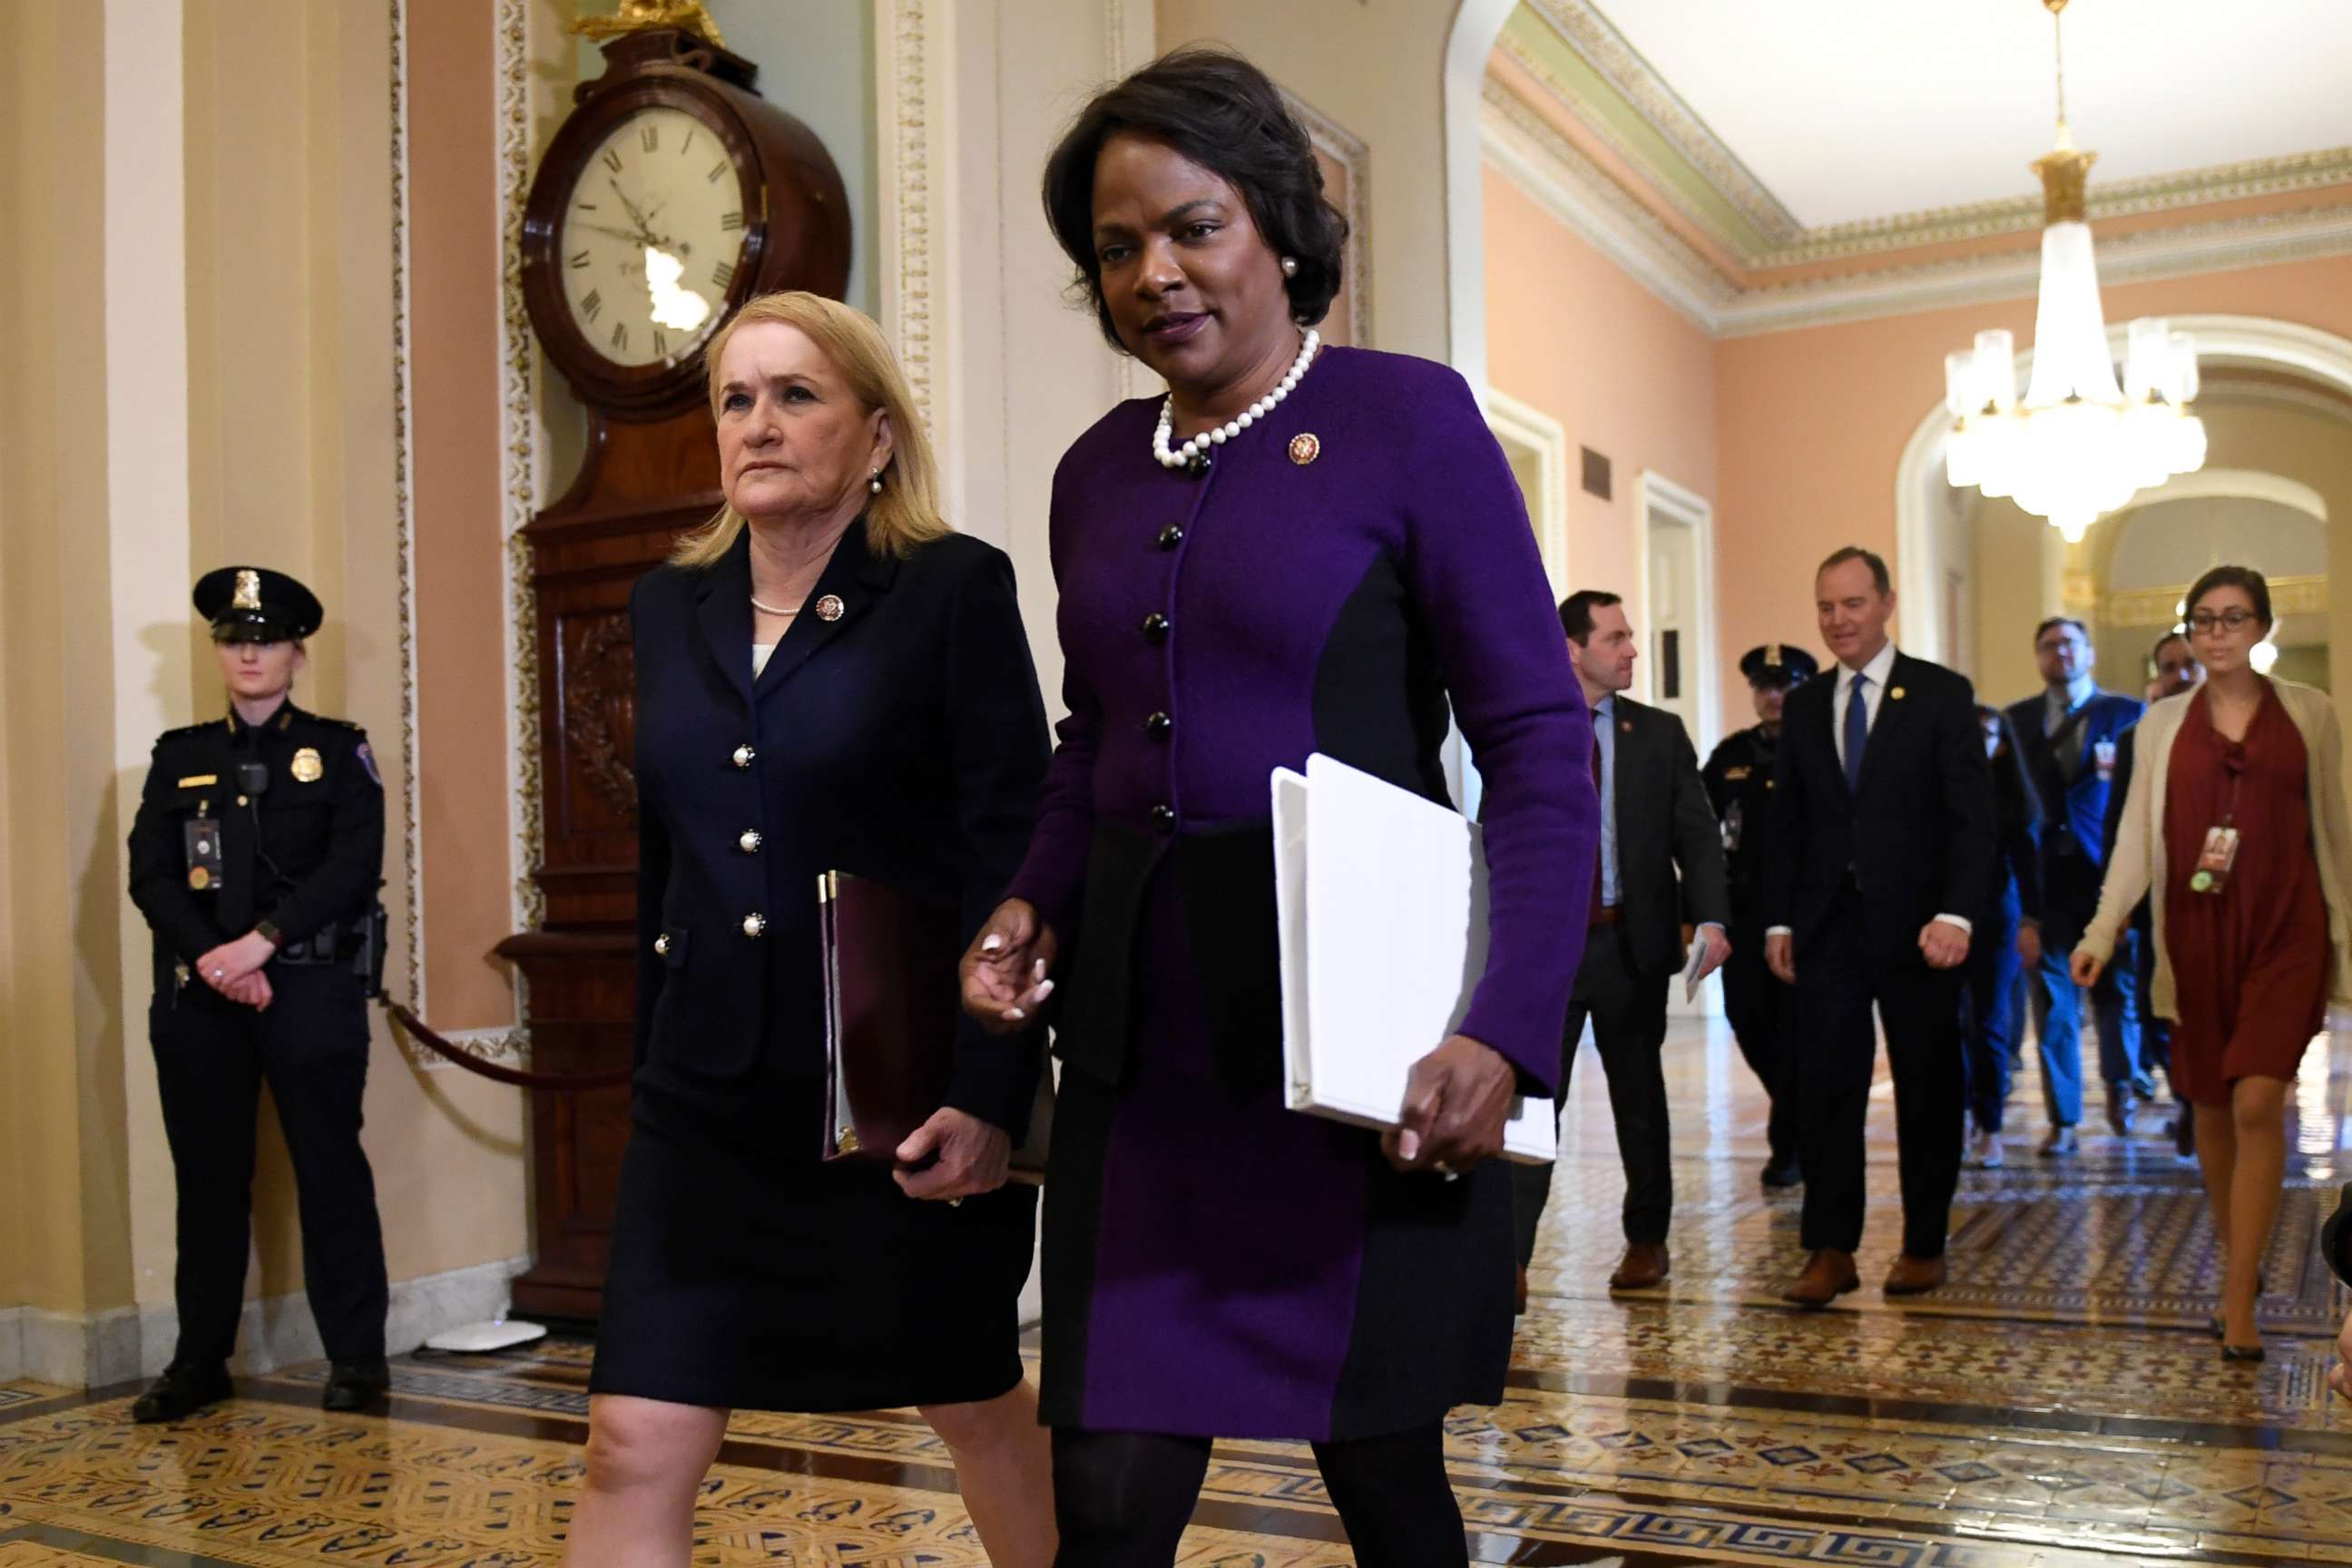 PHOTO: House Democratic impeachment managers Rep. Sylvia Garcia, second from left, and Rep. Val Demmings, third from left, arrive on the Senate side of Capitol Hill in Washington, Feb. 3, 2020, for the impeachment trial of President Donald Trump.